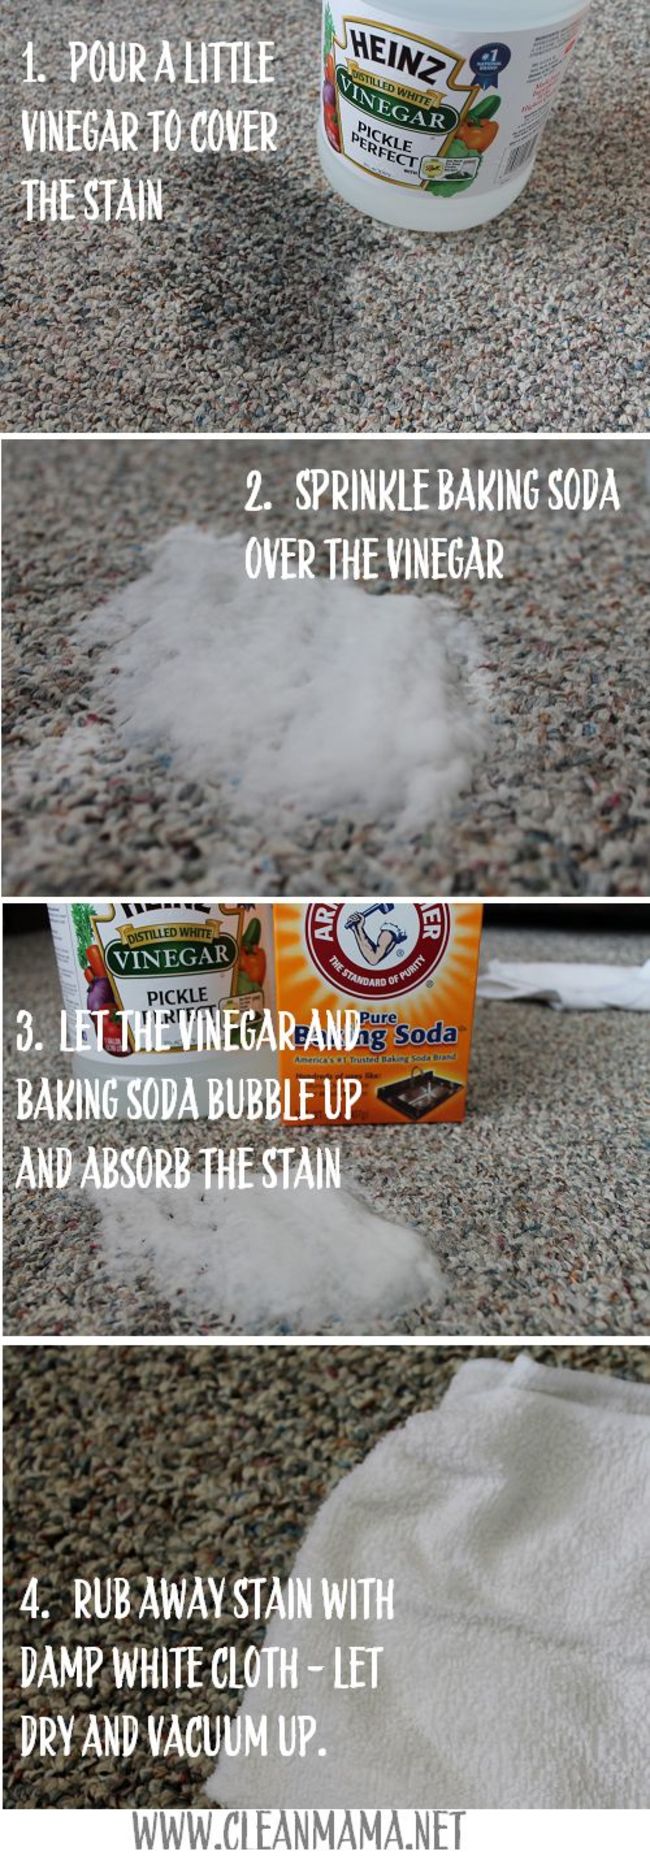 17. Vinergar and baking soda to the rescue!